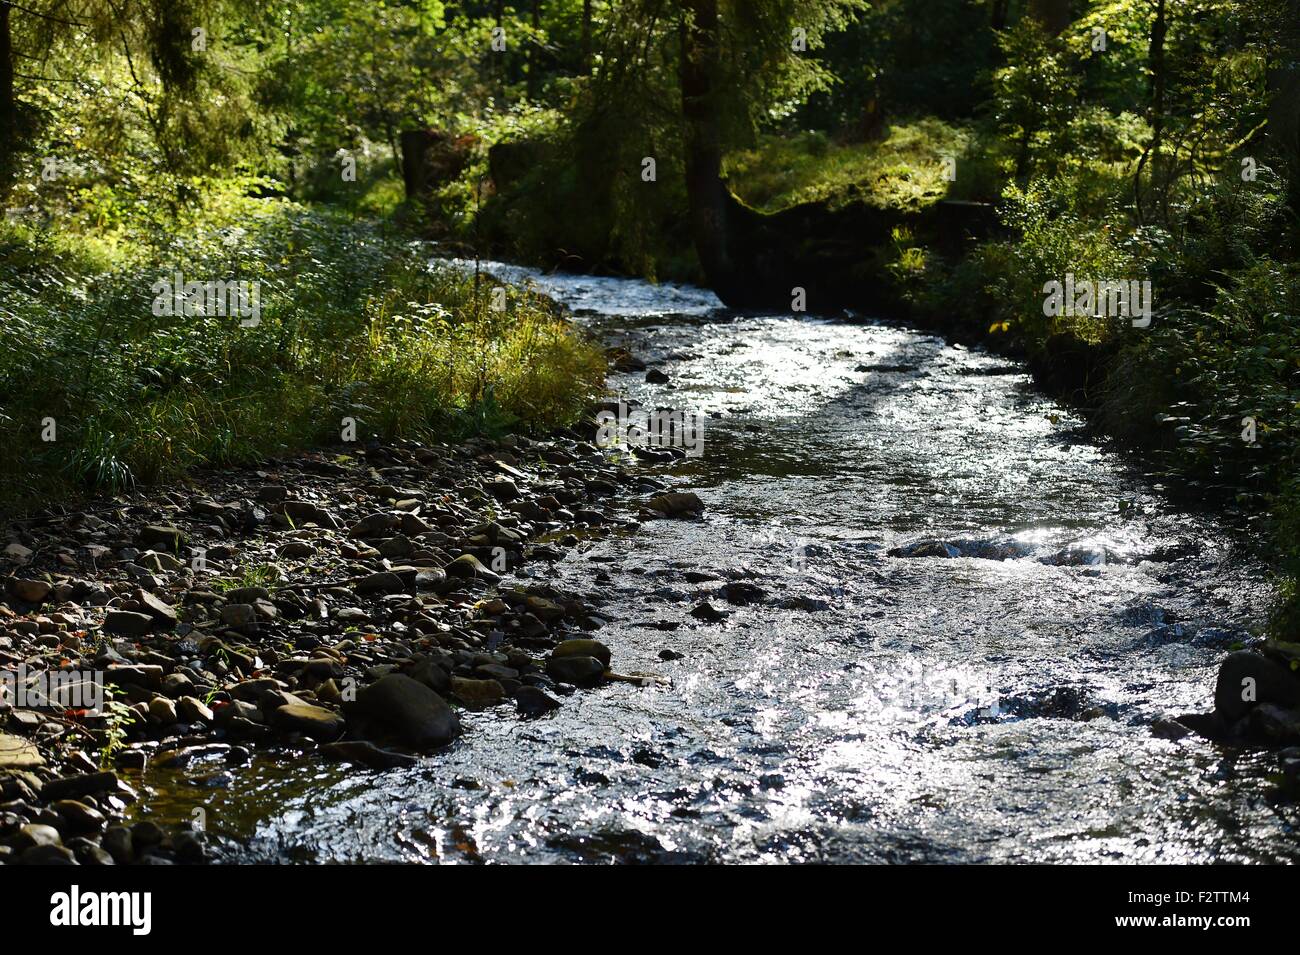 A small river in autumn, Germany, near city of Riefensbeek, 23. September 2015. Photo: Frank May Stock Photo